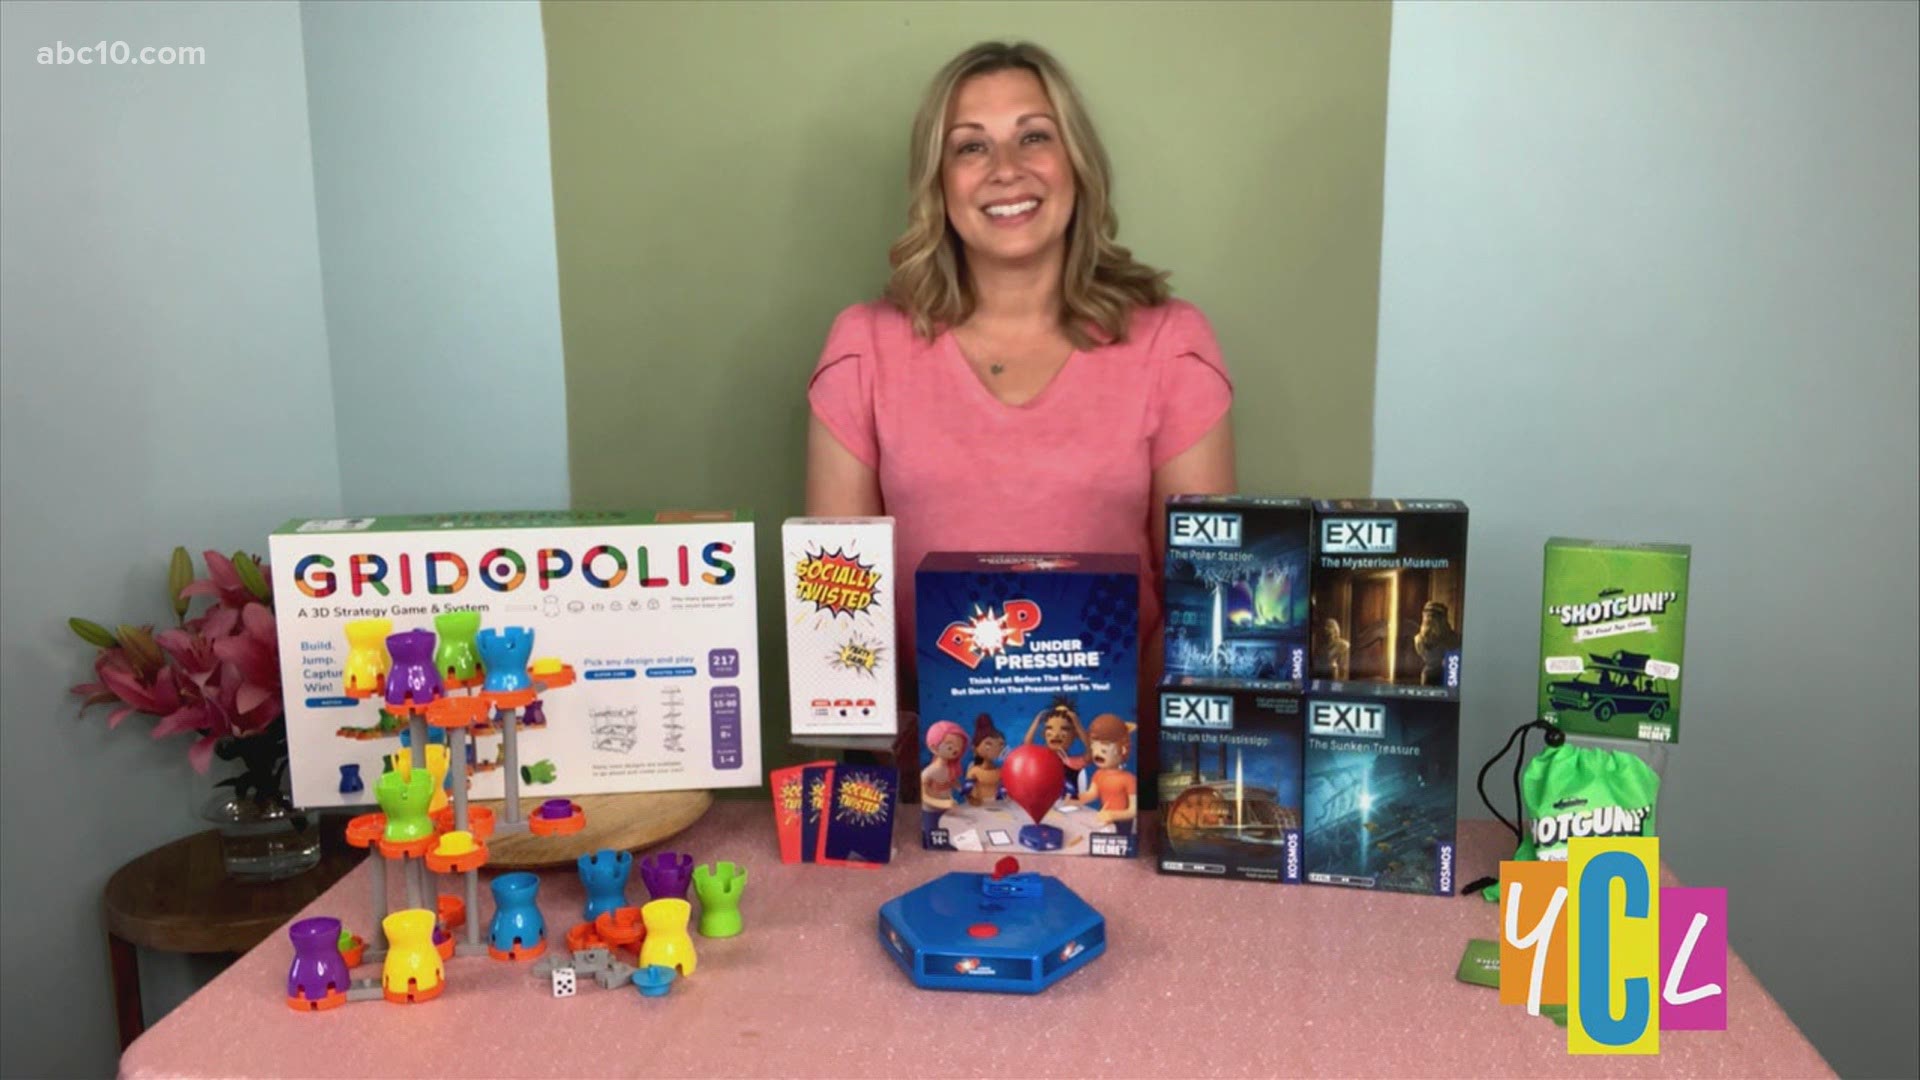 Who doesn't love a good game night!? We get a rundown of fun and exciting games for all ages. Plus, hear about the mental health benefits of family game play too.